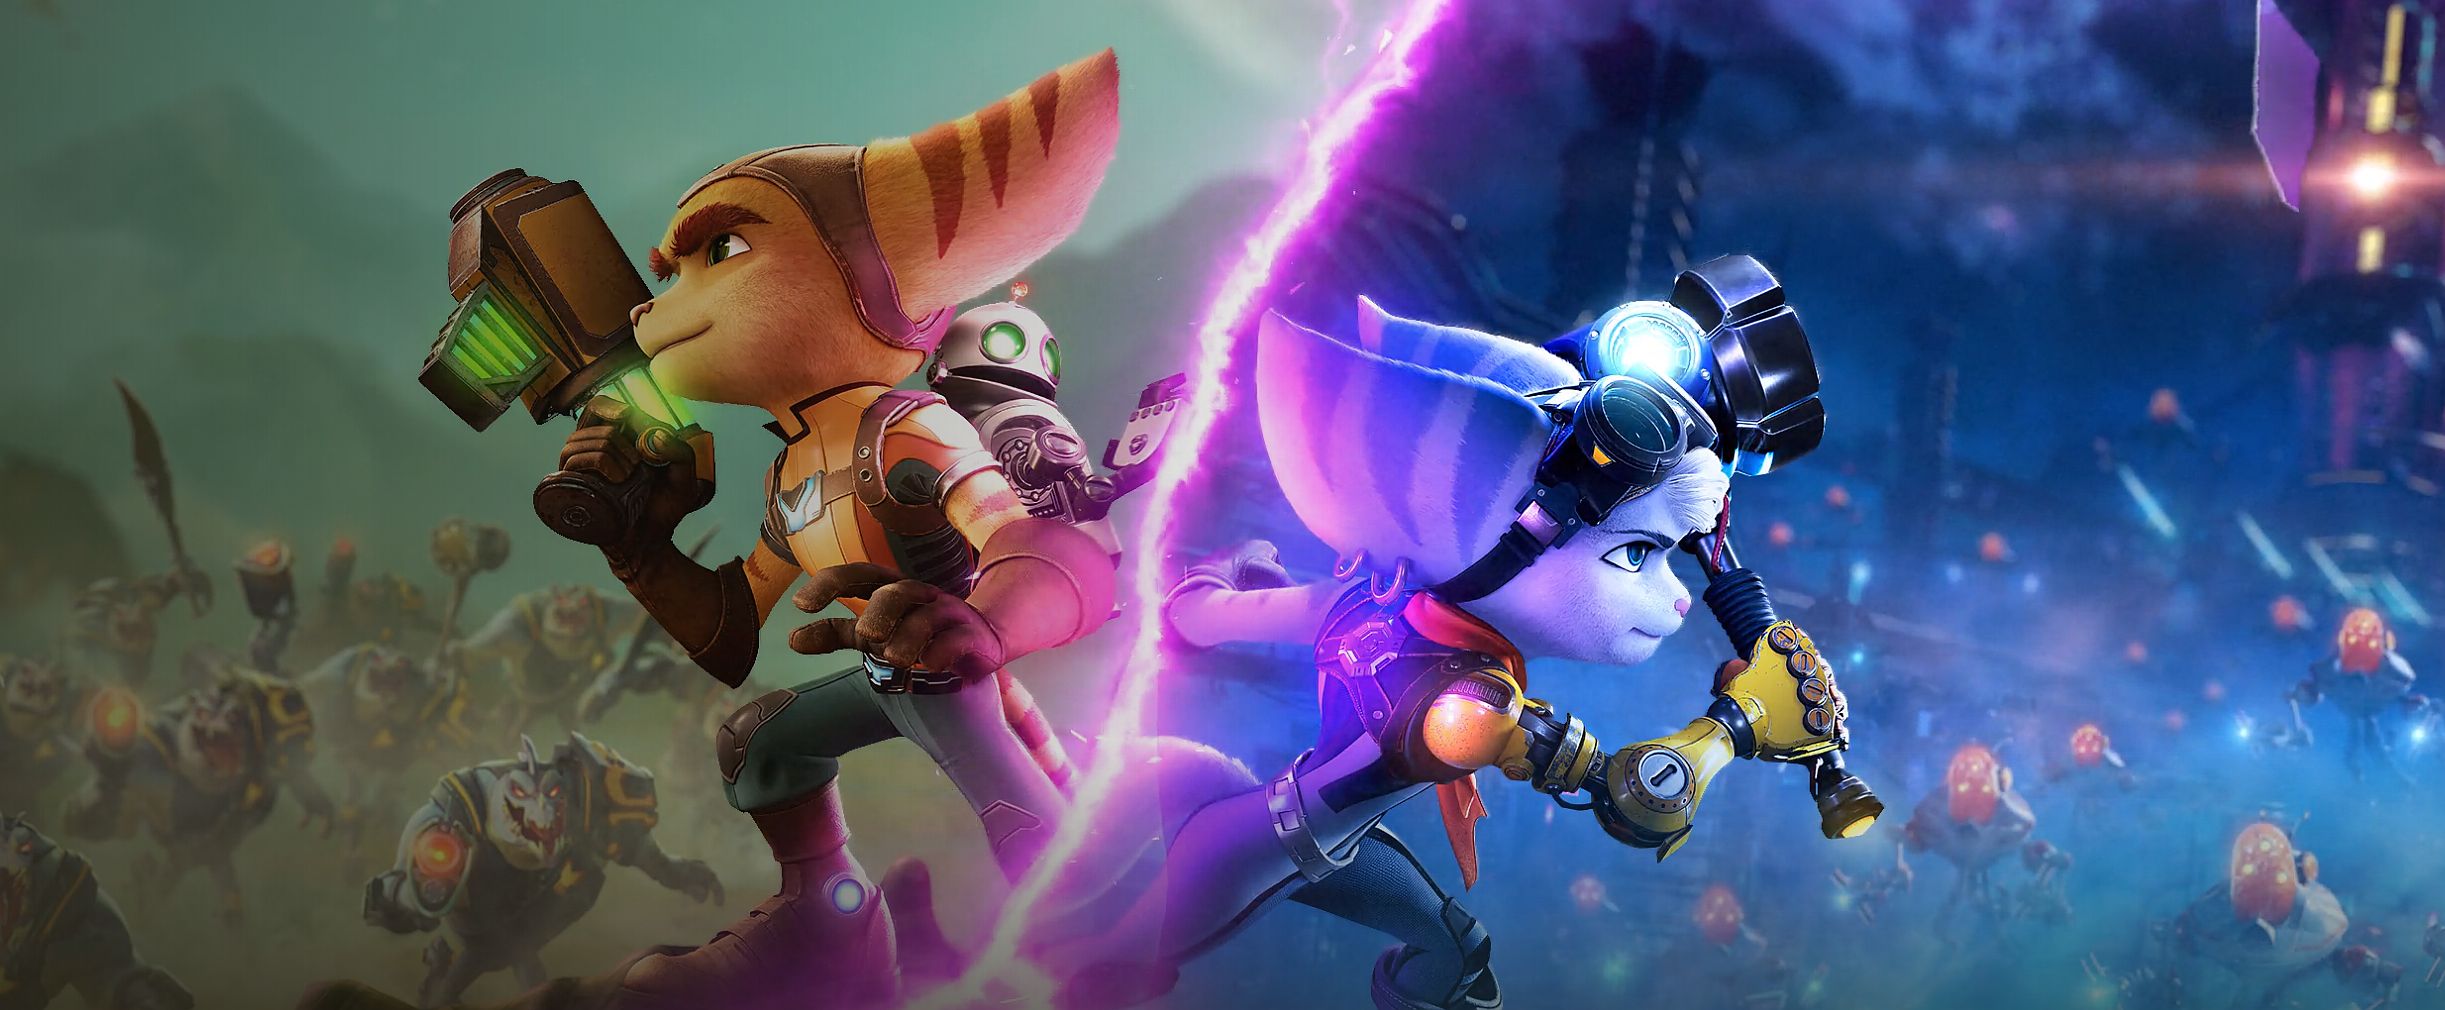 Image for Ratchet and Clank: Rift Apart enjoyed a "completely crunch free" development